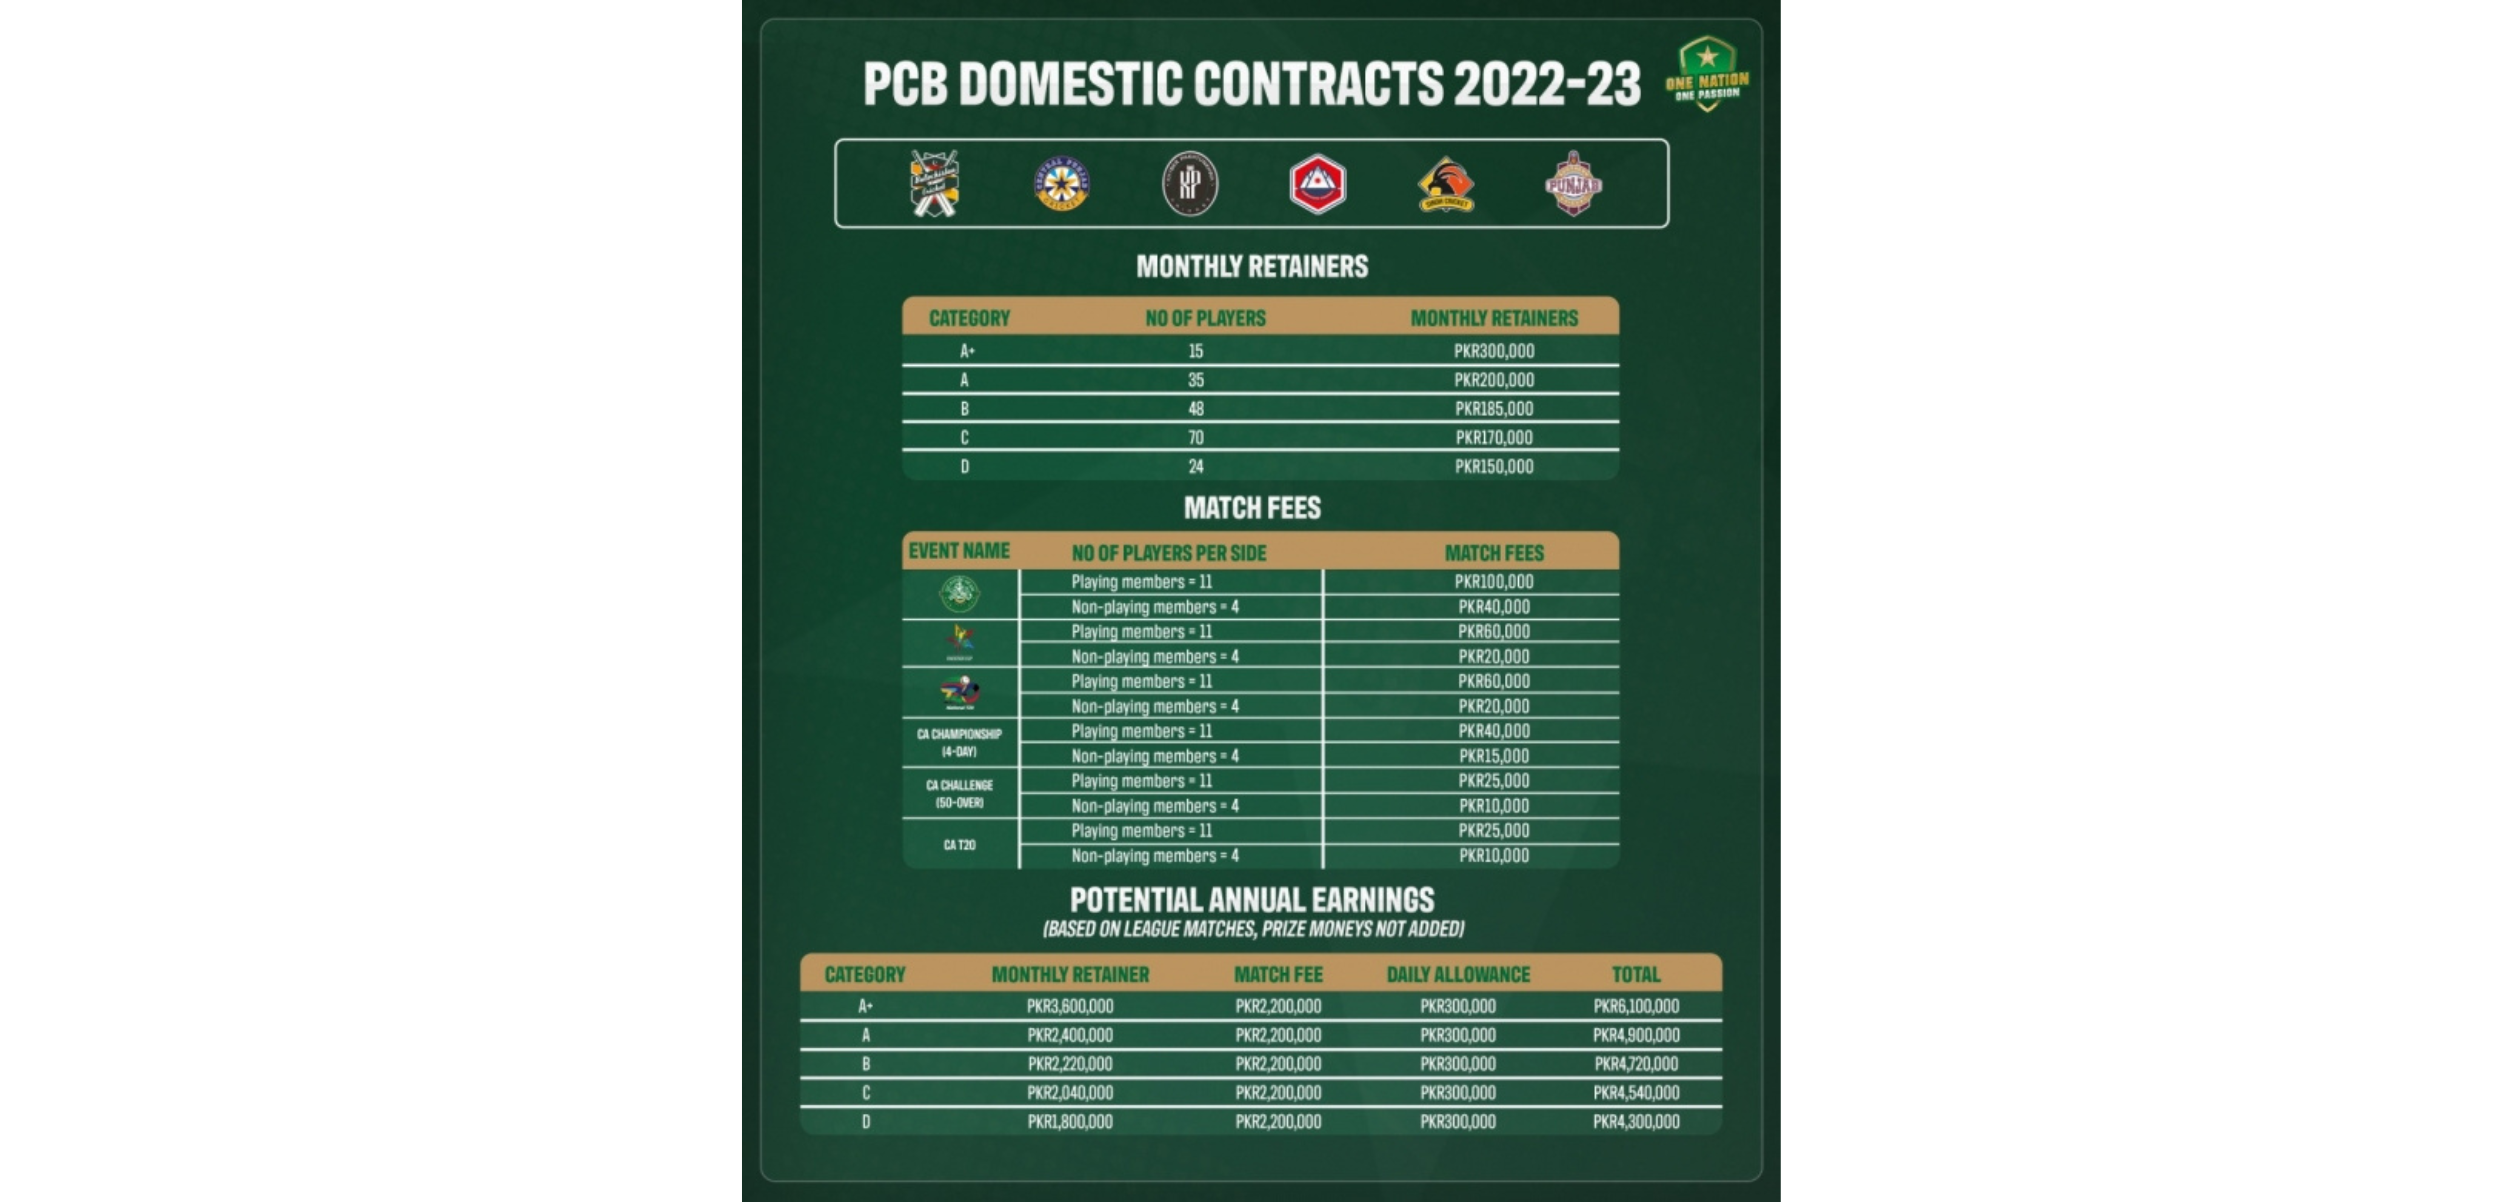 PCB: BoG approves increase in retainers, match fees in 2022-23 domestic contracts